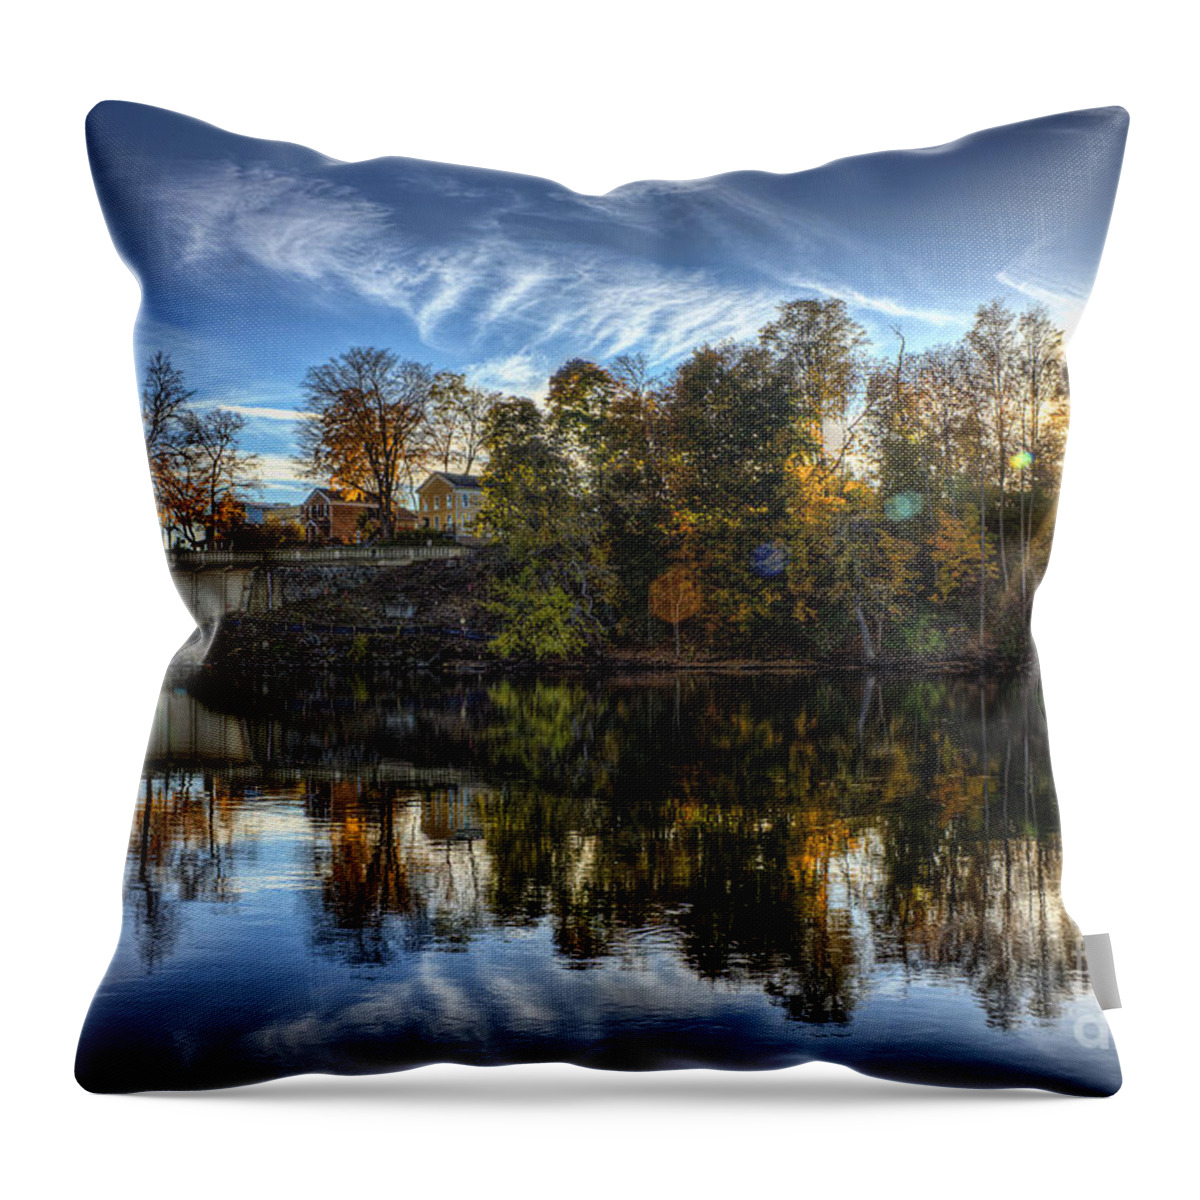 Hdr Throw Pillow featuring the photograph Niles Reflections by Scott Wood